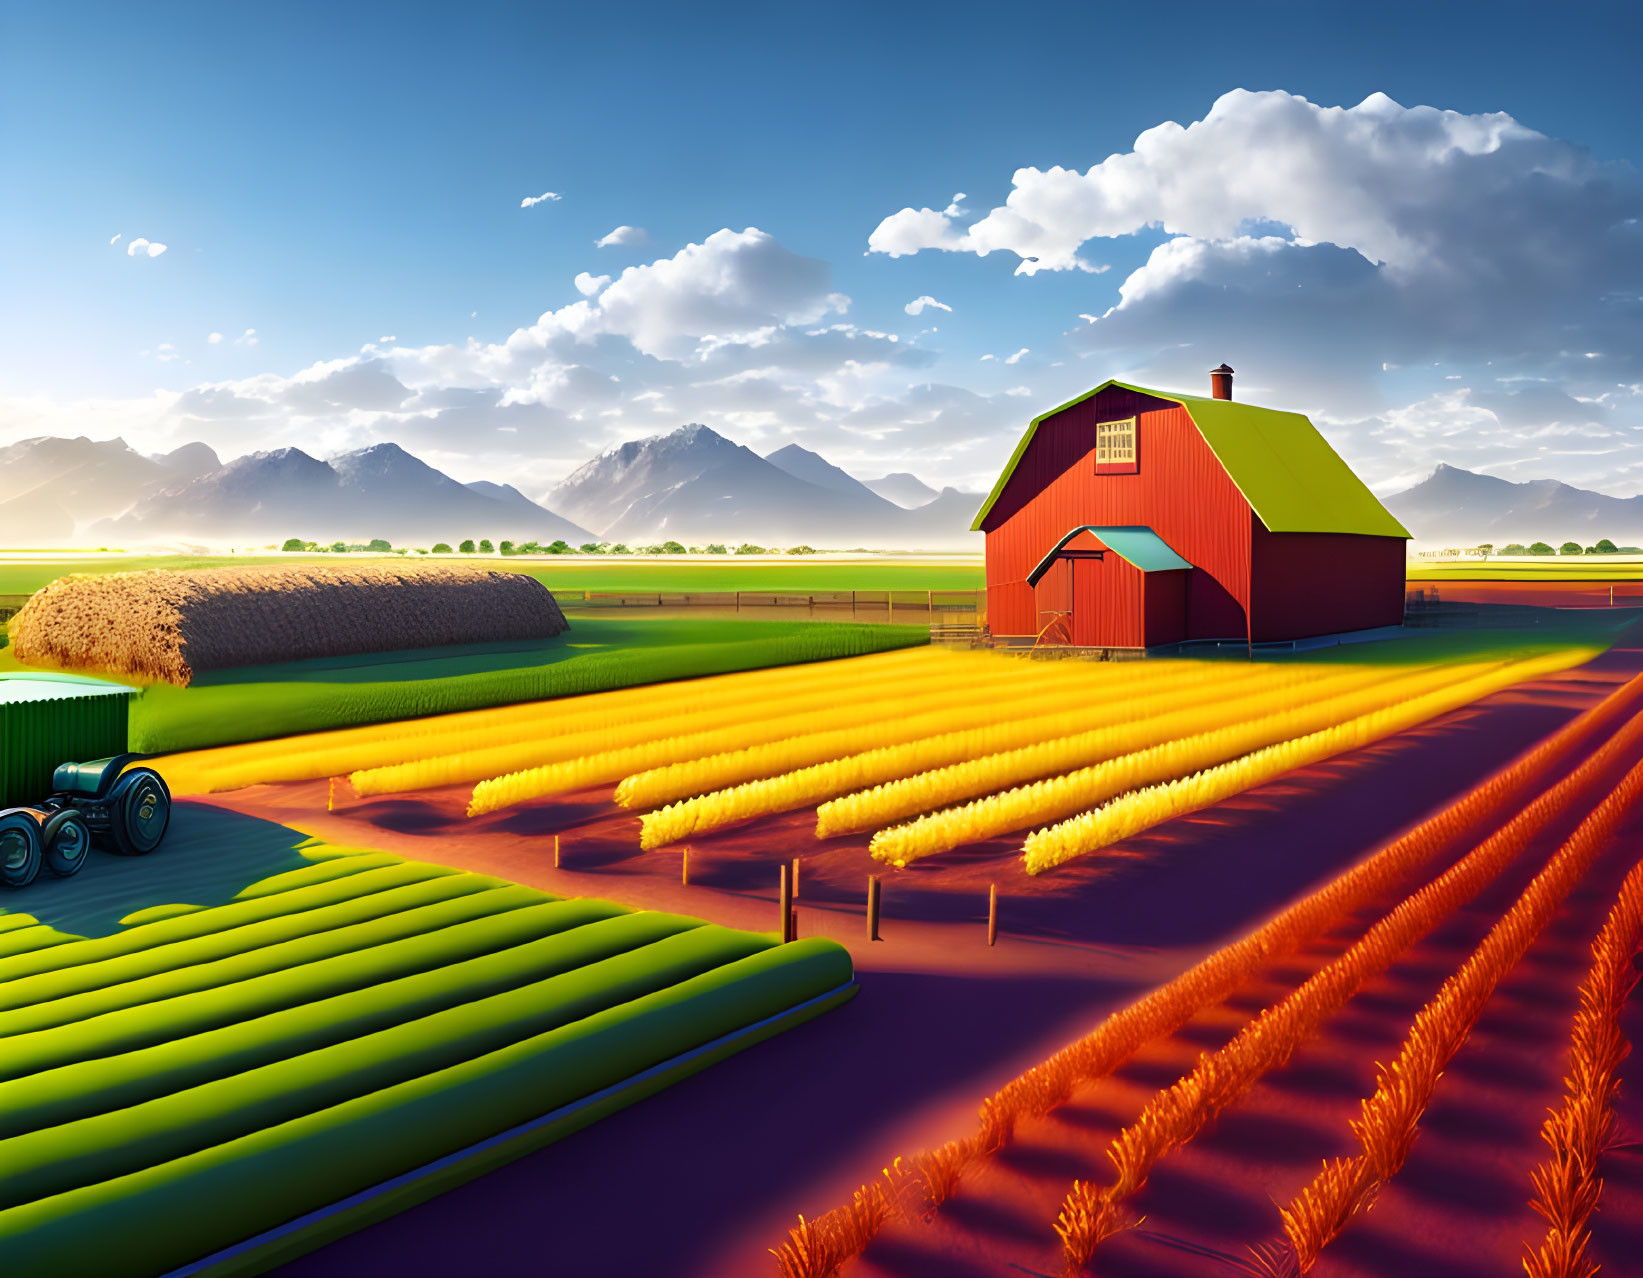 Colorful Farm Scene with Red Barn, Haystack, and Tractor under Clear Sky